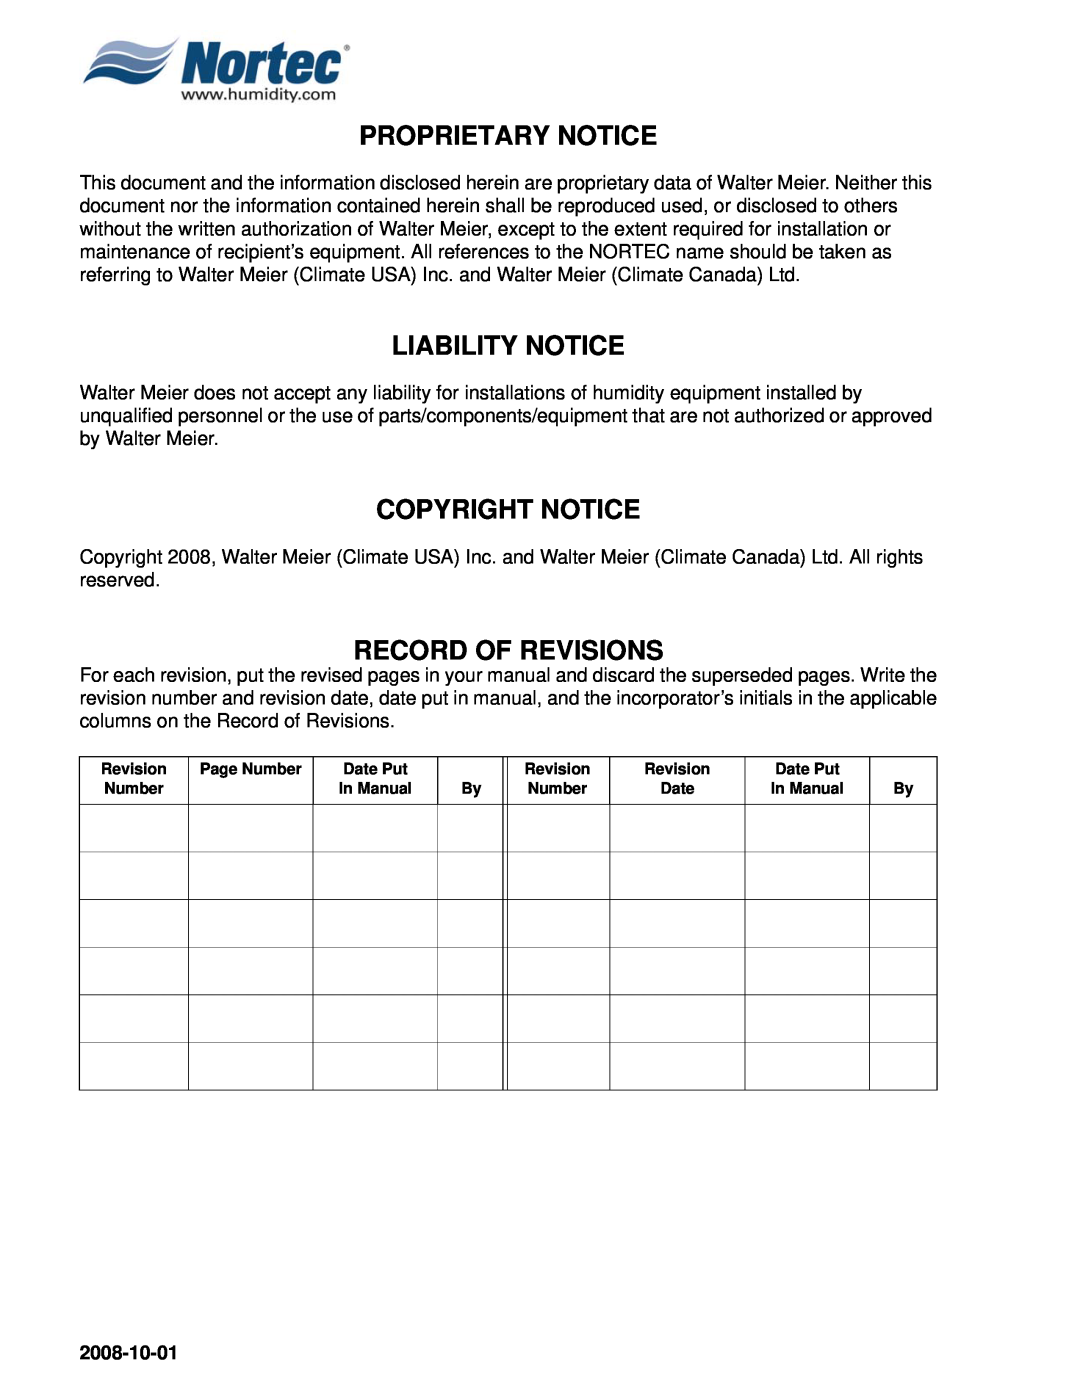 Nortec Industries NH Series Proprietary Notice, Liability Notice, Copyright Notice, Record Of Revisions, 2008-10-01 